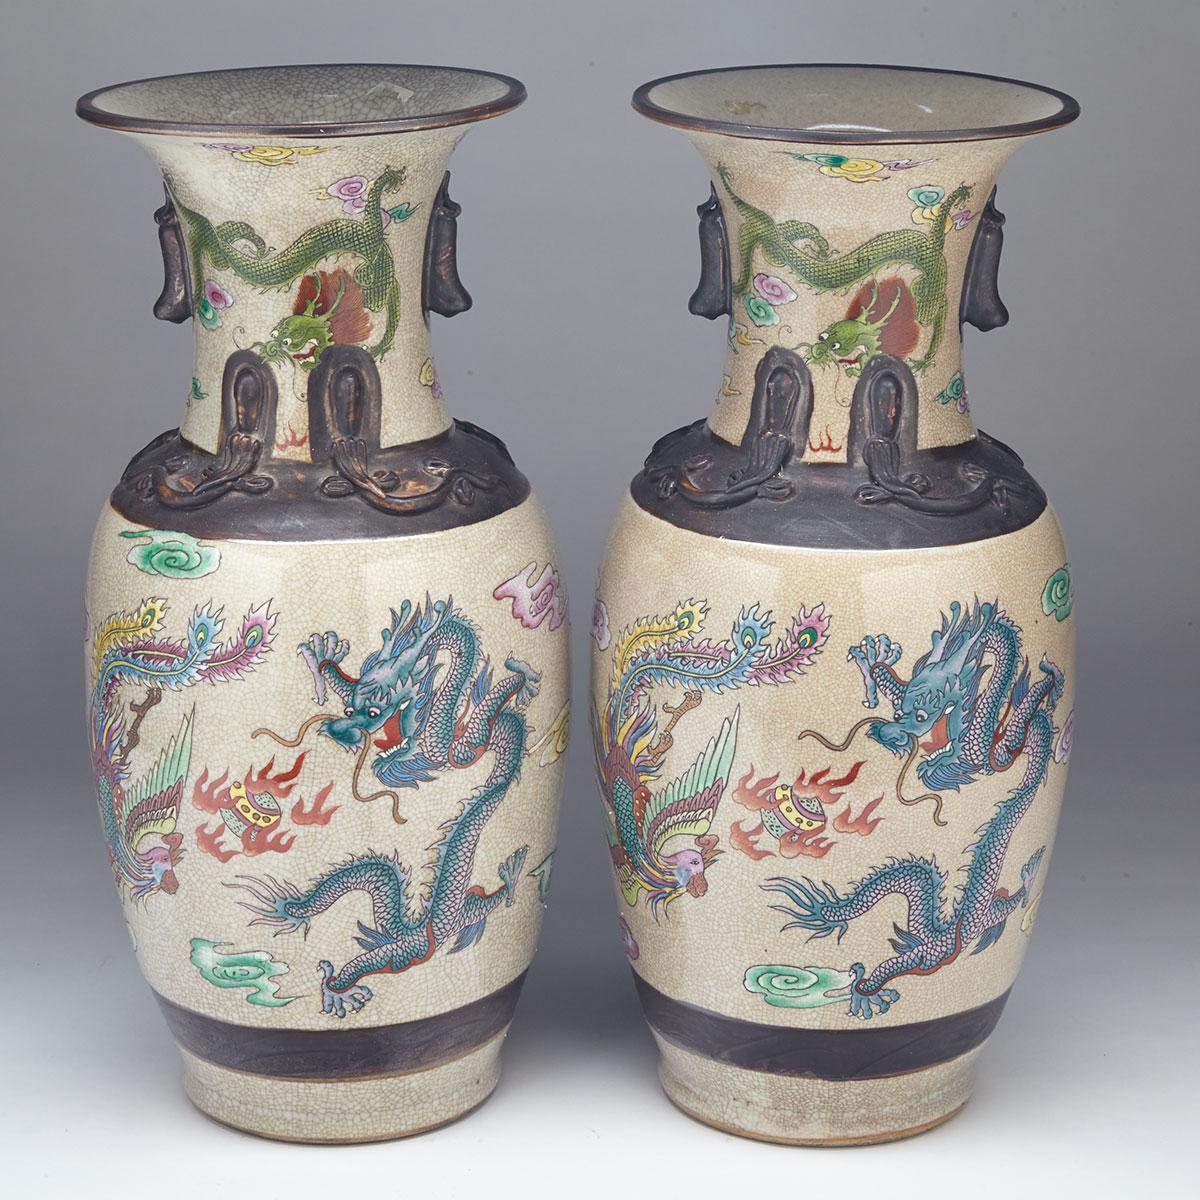 Pair of Famille Rose ‘Phoenix and Dragon’ Vases, Chenghua Mark, Early 20th Century